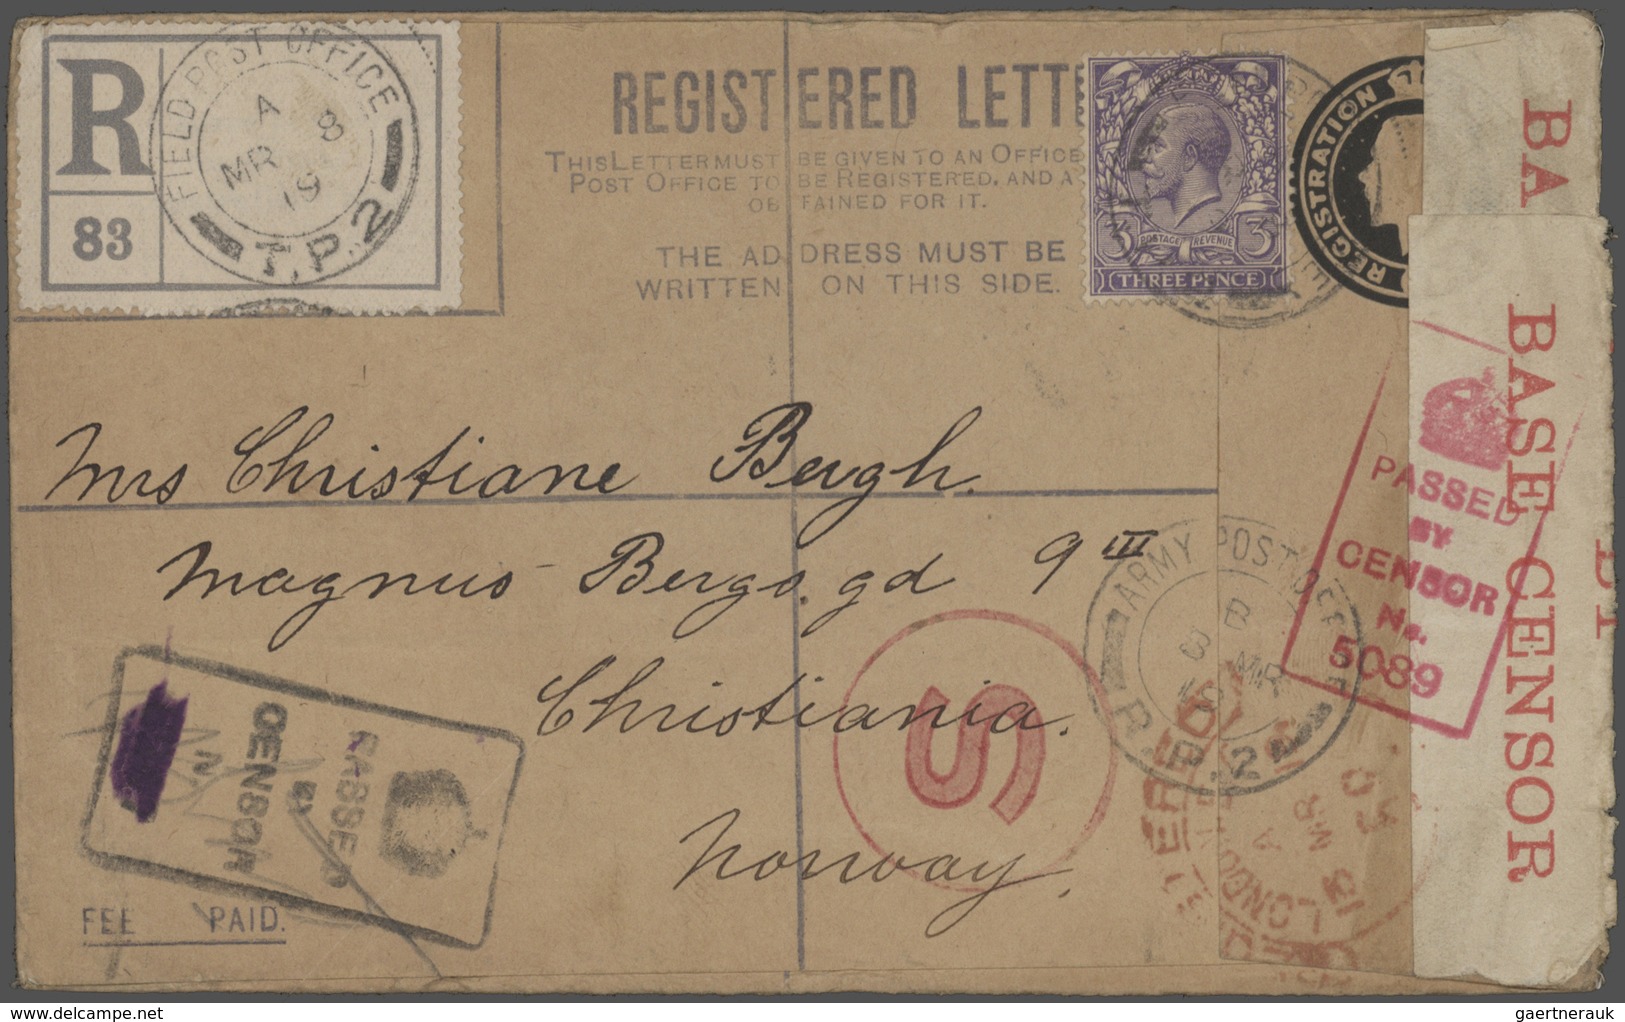 Br Großbritannien: 1836/1946: 77 better covers and postal stationeries including pre-philatelic, used A